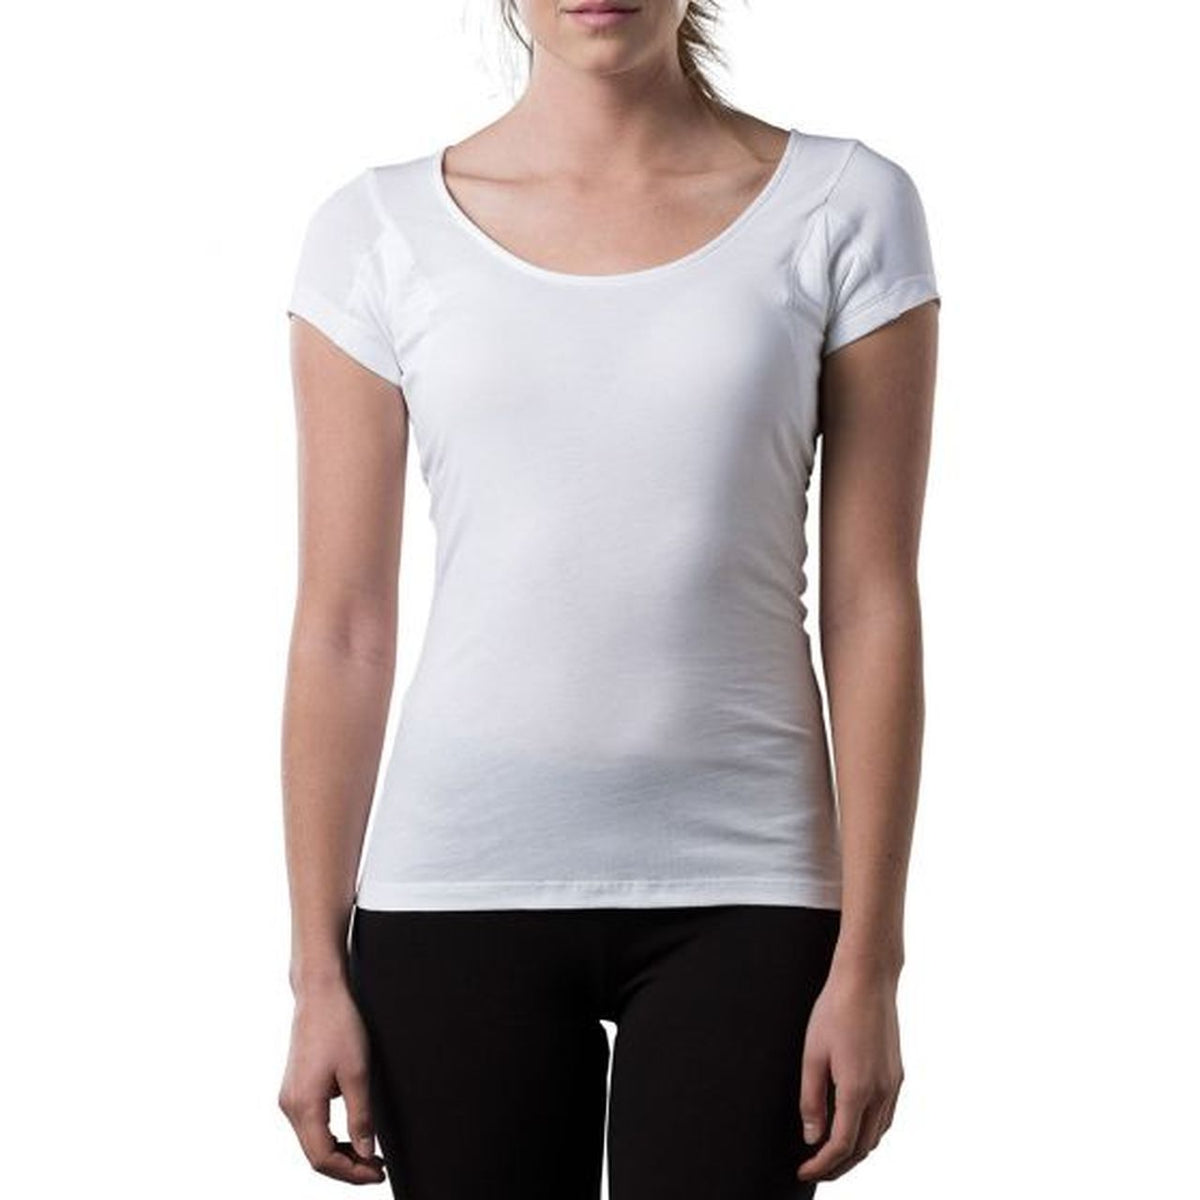  Tage Thompson Shirt for Women (Women's V-Neck, Small